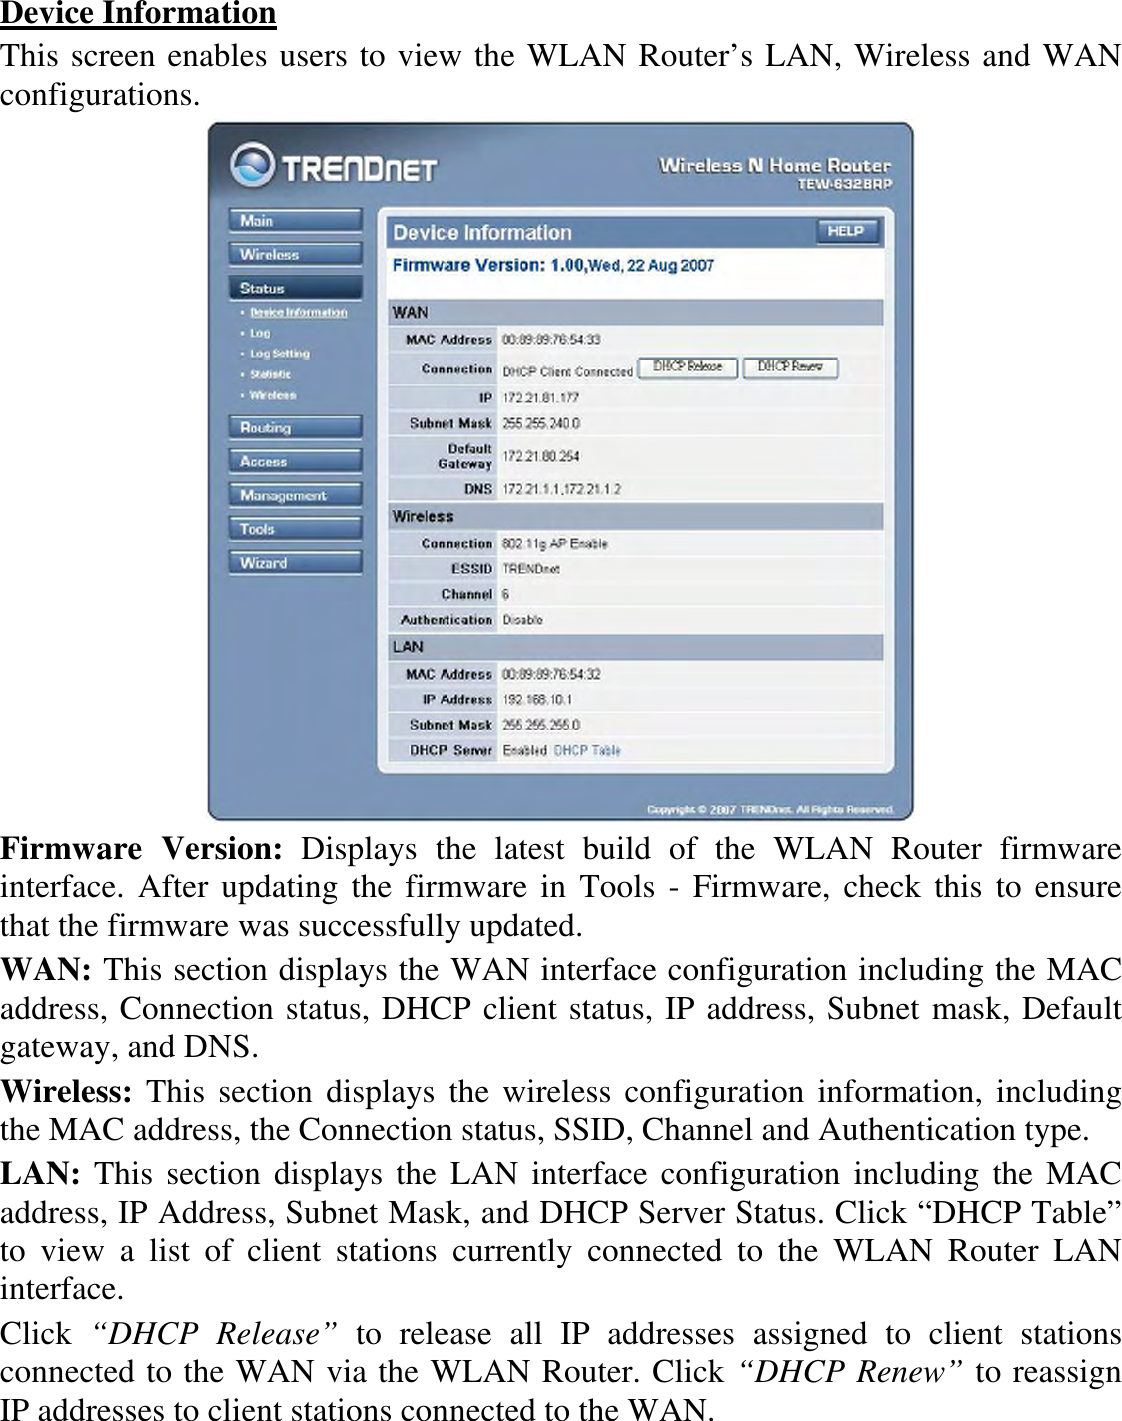 Device Information This screen enables users to view the WLAN Router’s LAN, Wireless and WAN configurations.  Firmware  Version:  Displays  the  latest  build  of  the  WLAN  Router  firmware interface.  After updating the firmware in  Tools - Firmware, check  this  to ensure that the firmware was successfully updated. WAN: This section displays the WAN interface configuration including the MAC address, Connection status, DHCP client status, IP address, Subnet mask, Default gateway, and DNS.  Wireless:  This section displays the wireless configuration information, including the MAC address, the Connection status, SSID, Channel and Authentication type. LAN: This section  displays the LAN interface  configuration including the MAC address, IP Address, Subnet Mask, and DHCP Server Status. Click “DHCP Table” to  view  a  list  of  client  stations  currently  connected  to  the  WLAN  Router  LAN interface. Click  “DHCP  Release”  to  release  all  IP  addresses  assigned  to  client  stations connected to the WAN via the WLAN Router. Click “DHCP Renew” to reassign IP addresses to client stations connected to the WAN. 